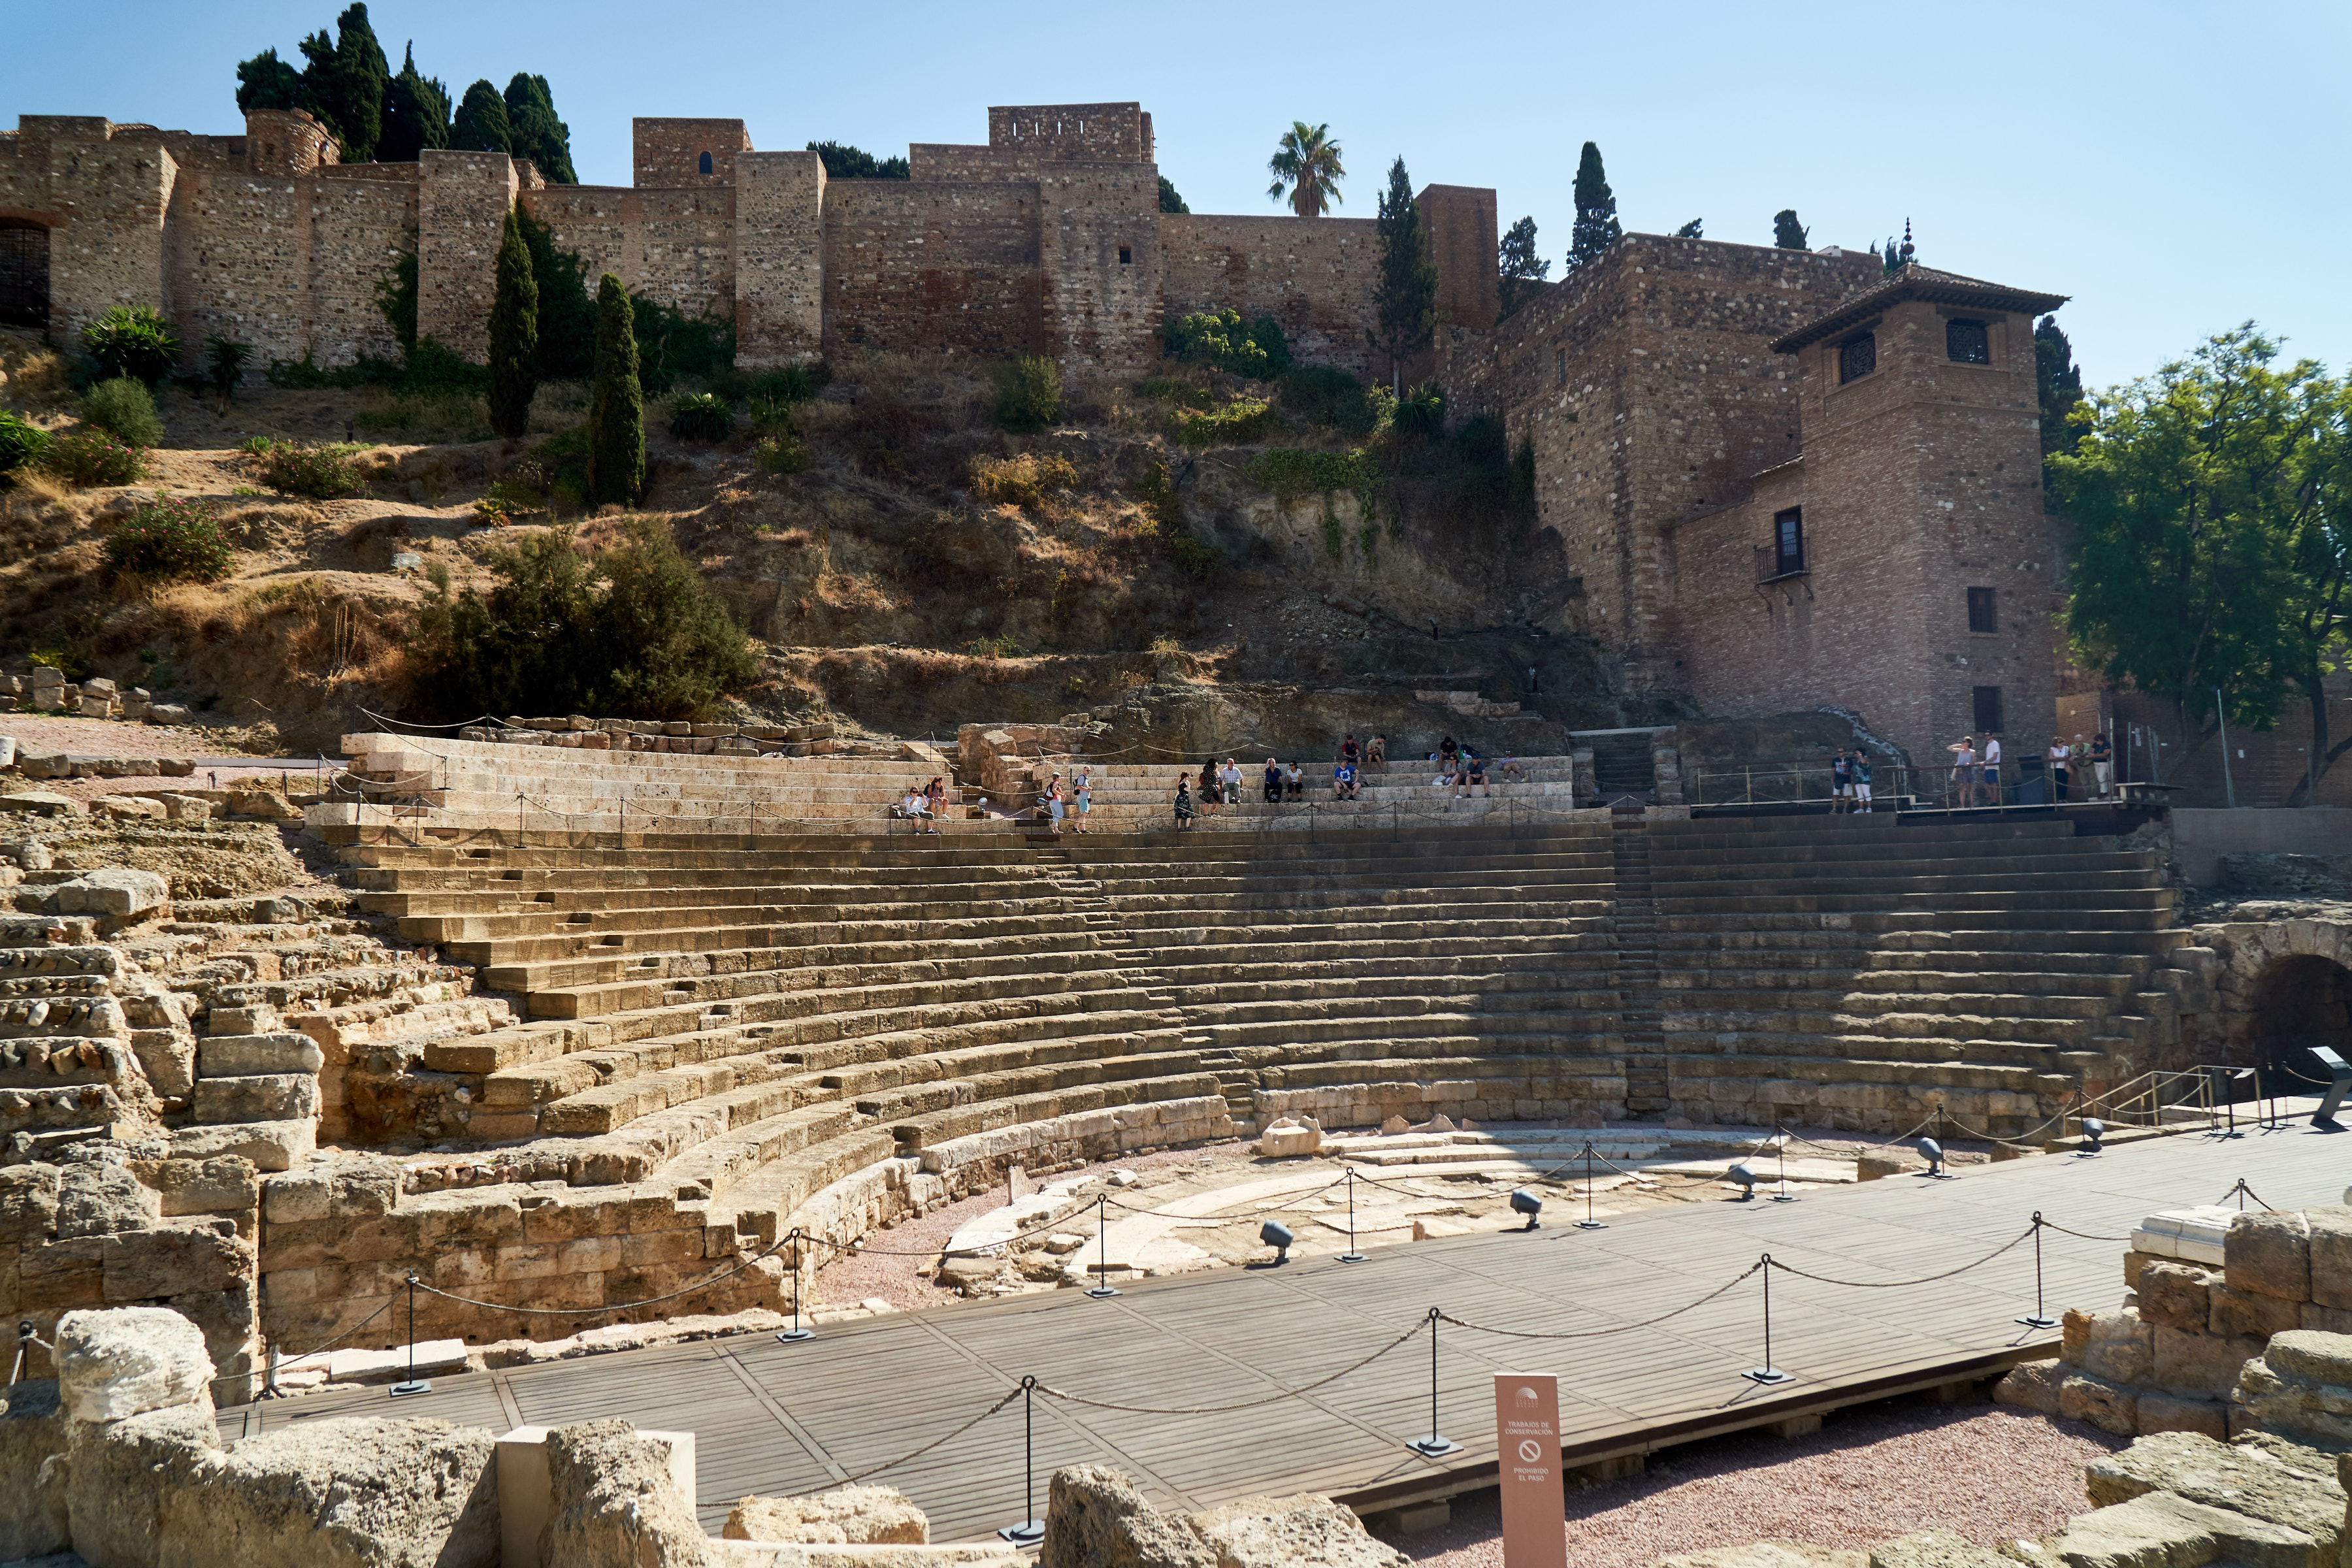 infront of the Alcazaba there is an old roman theater to be visited